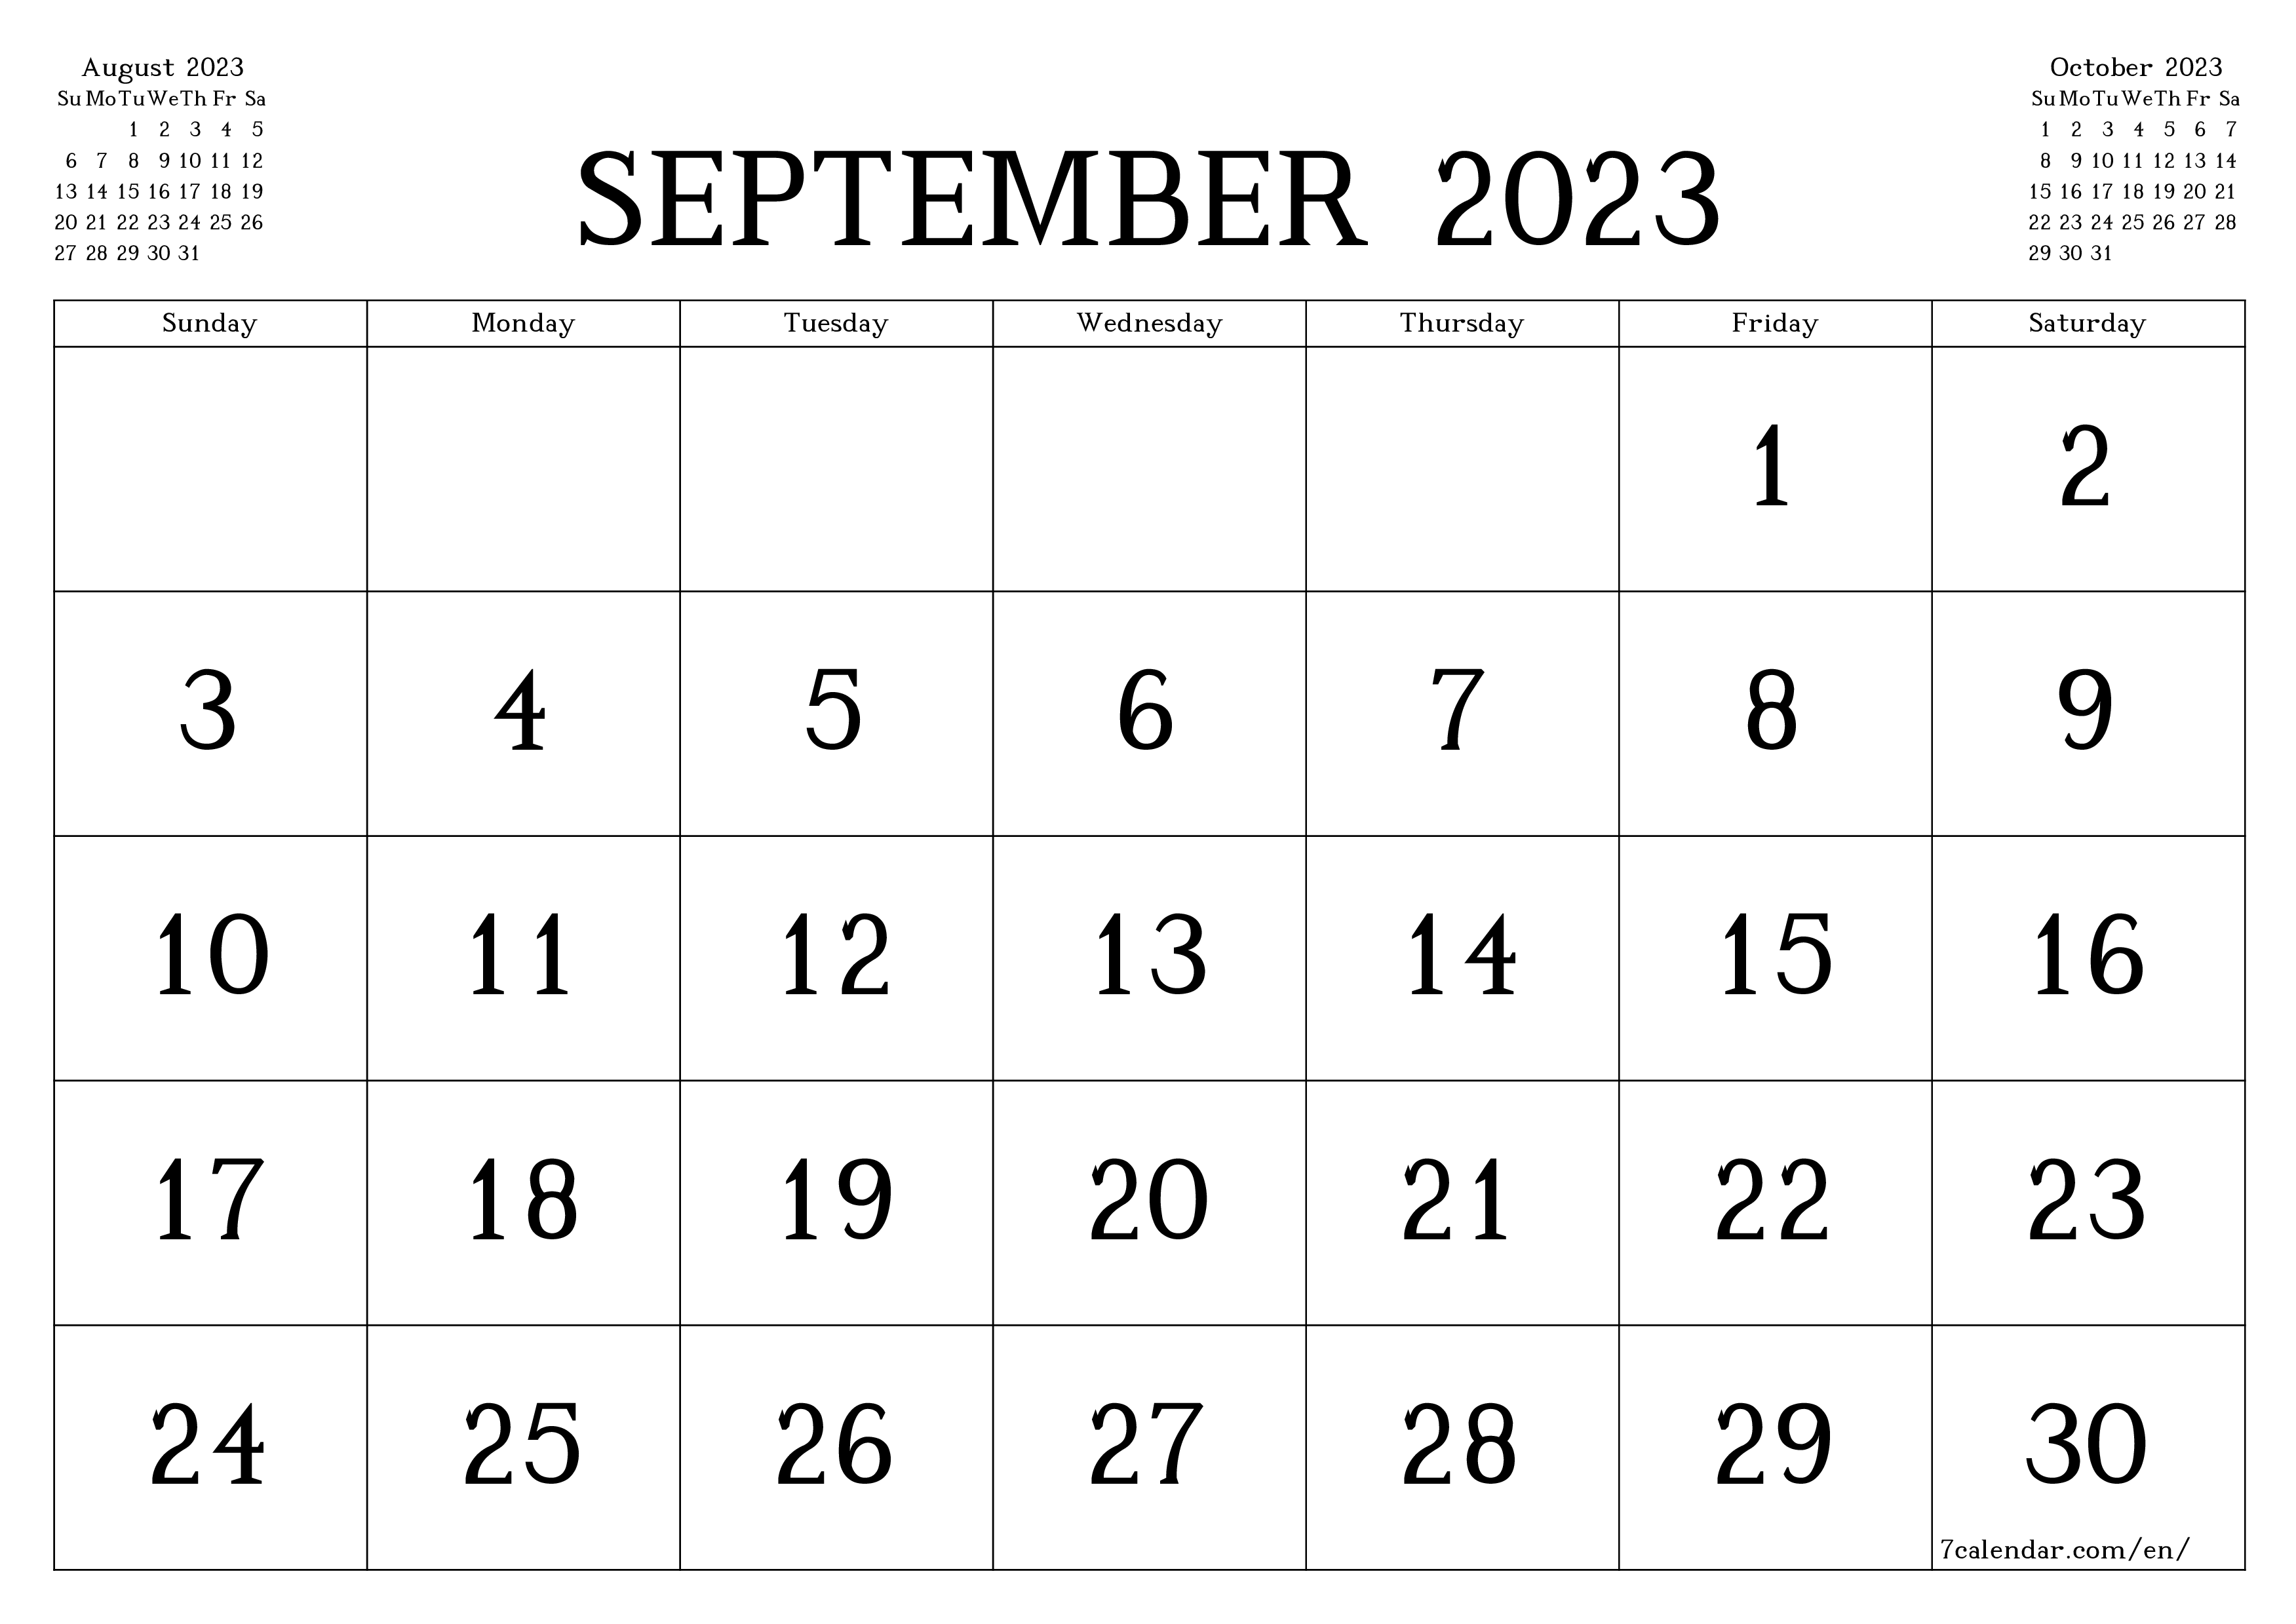 Blank monthly printable calendar and planner for month September 2023 with notes save and print to PDF PNG English - 7calendar.com